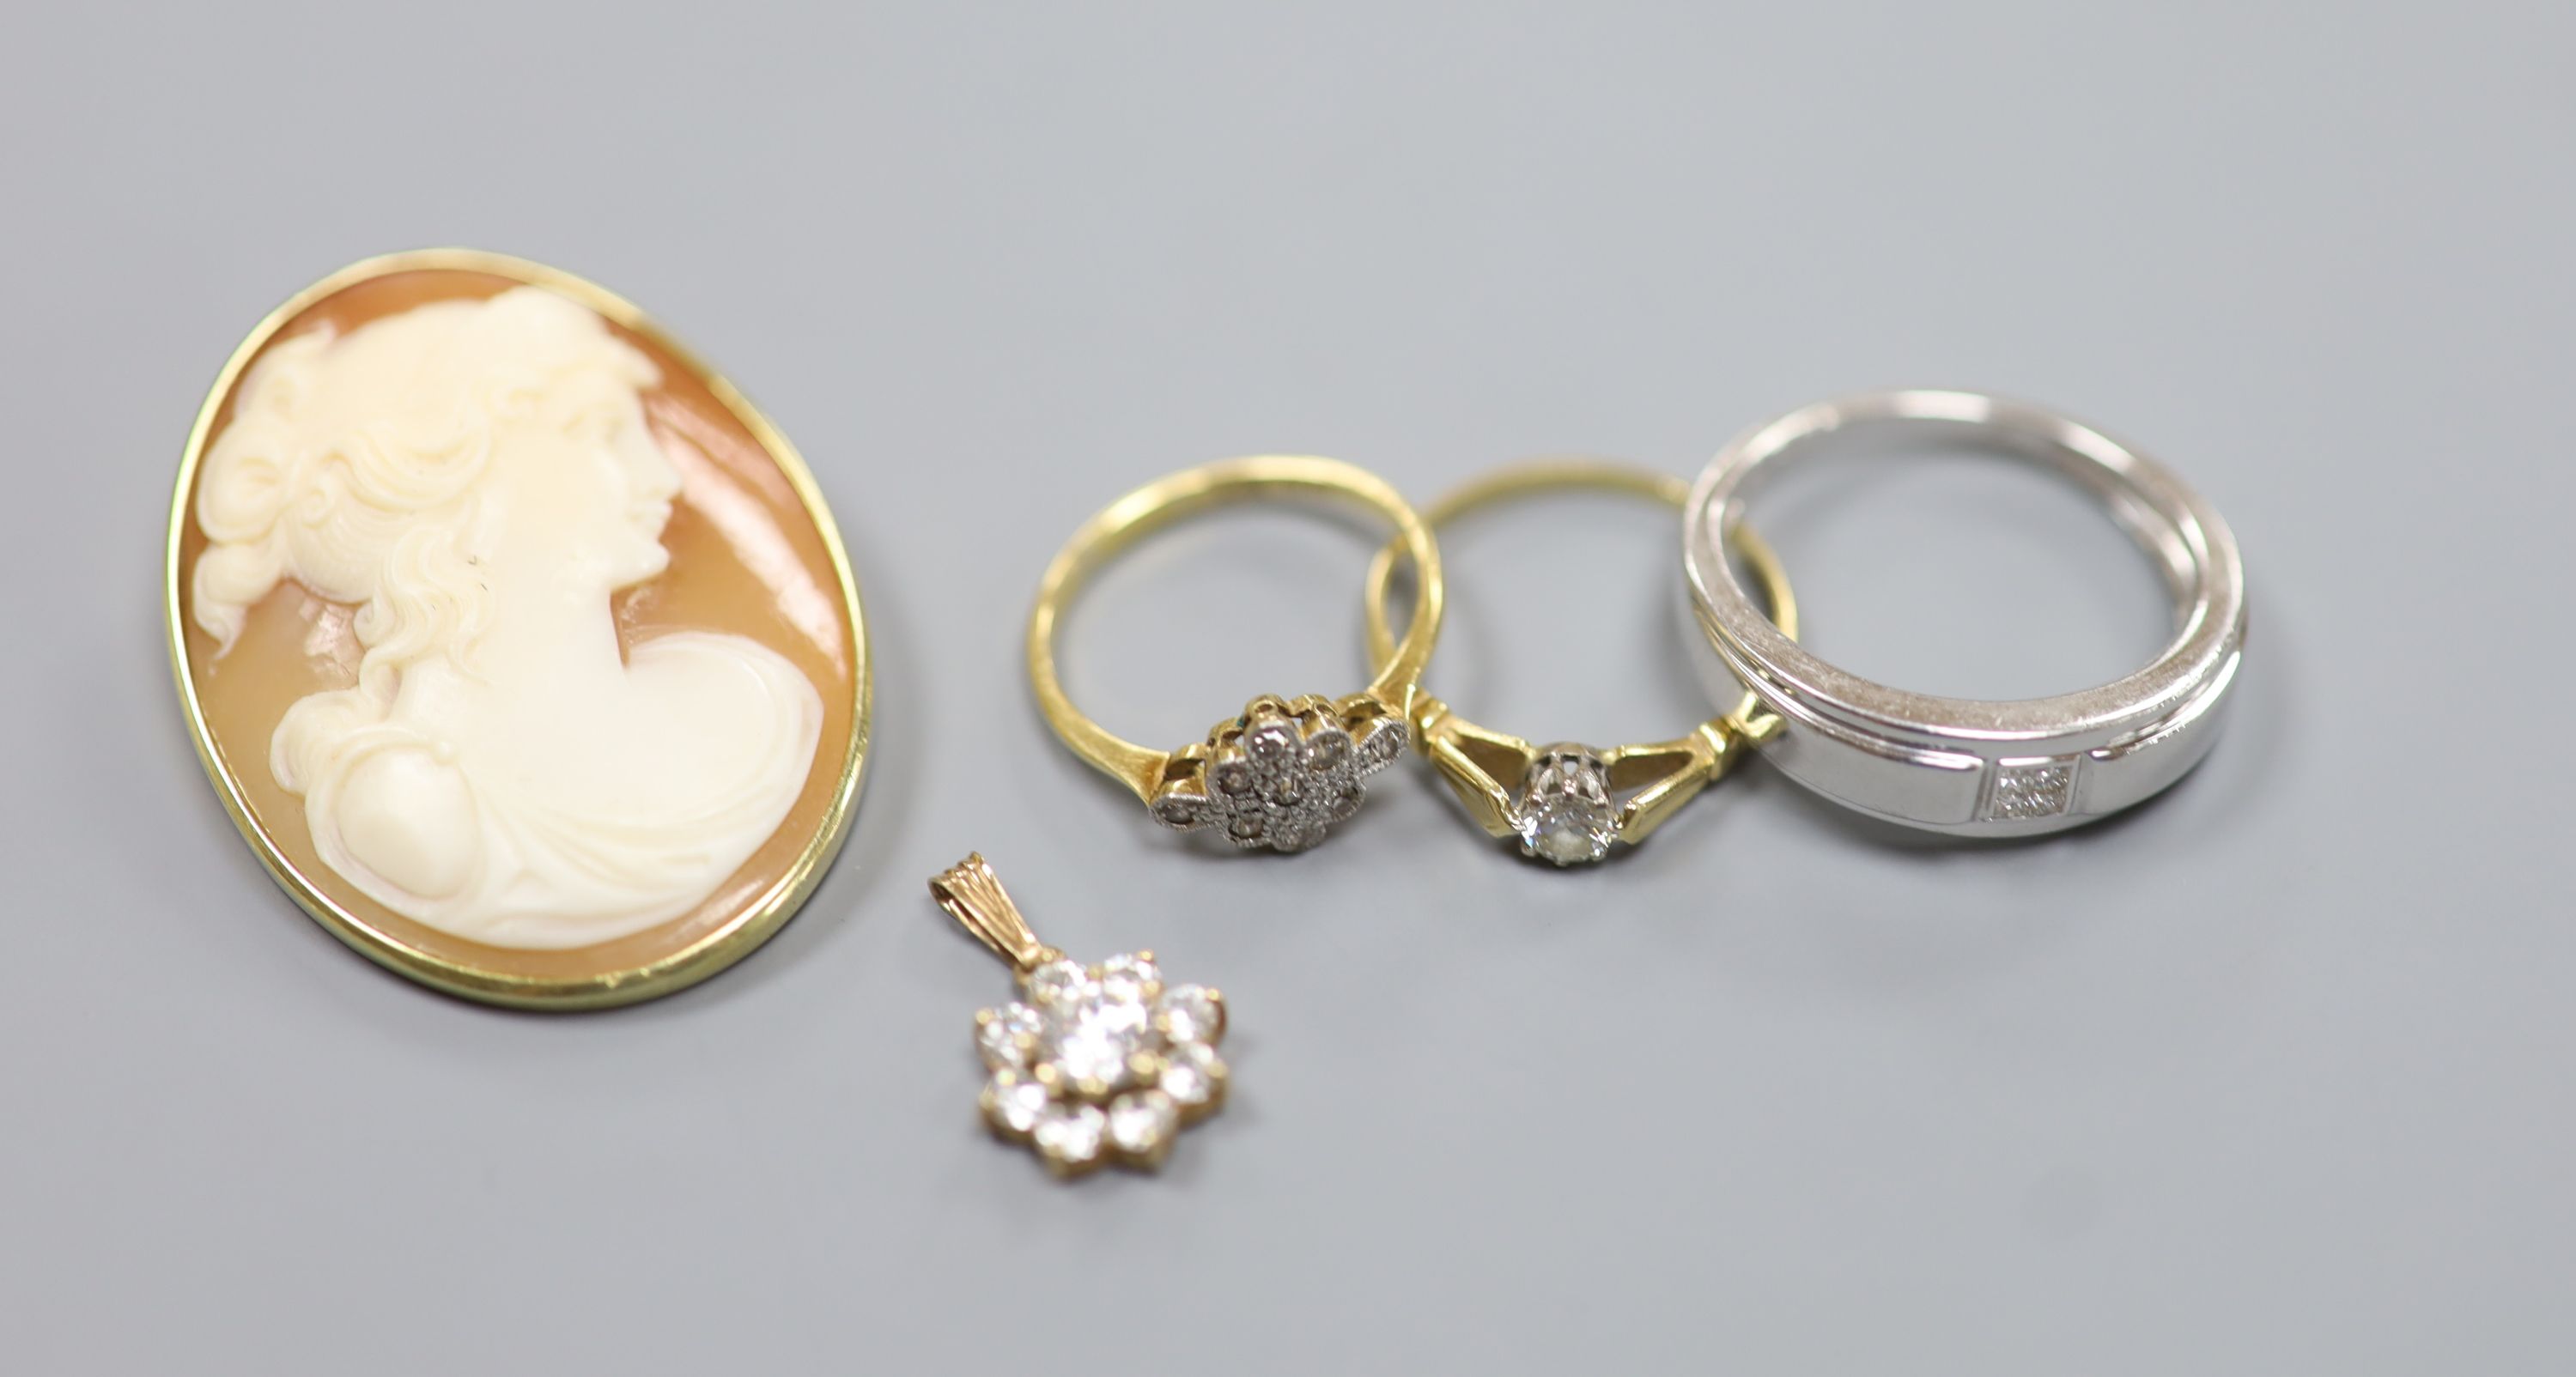 A modern 9ct white gold and diamond ring and a 9ct pendant, gross 4.7 grams, two 18ct and diamond rings, gross 3.6 grams and a yellow metal mounted cameo shell brooch, gross 9.5 grams.